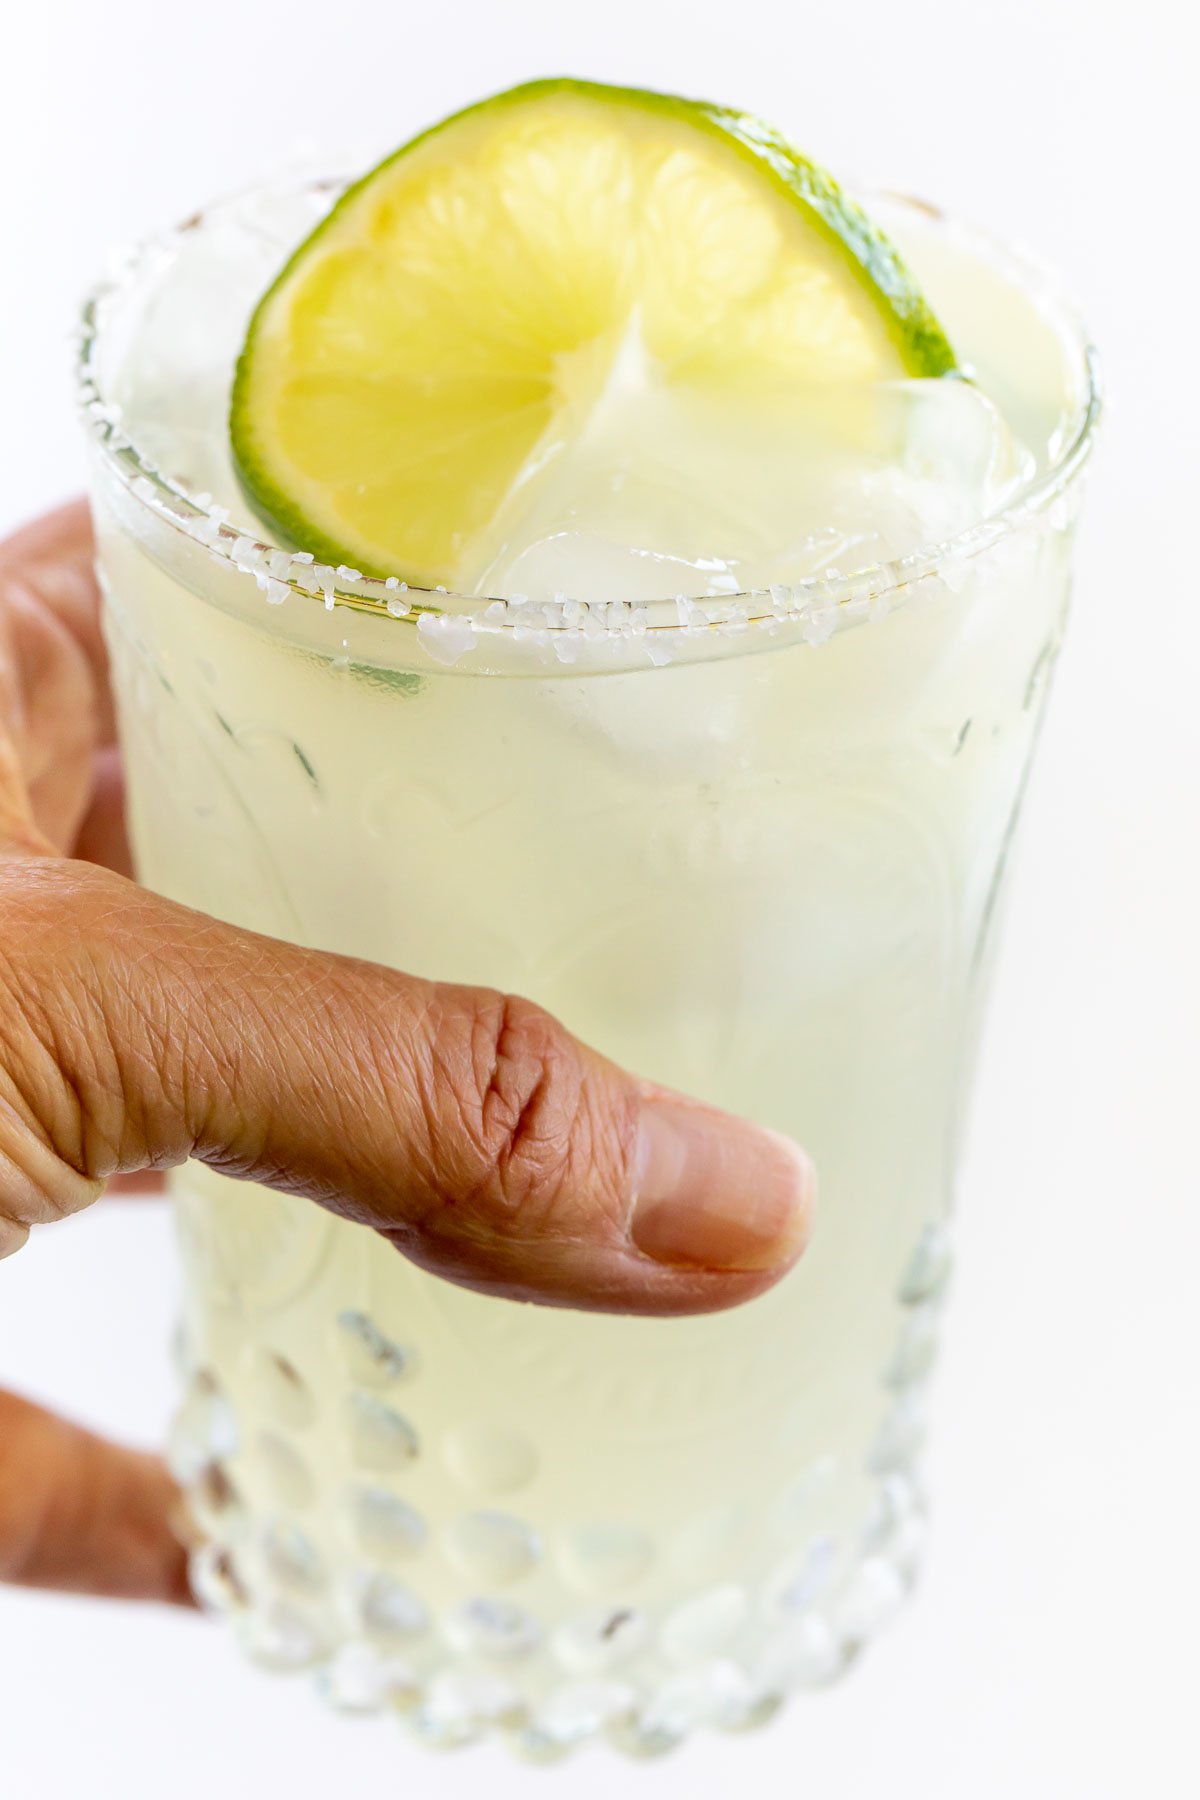 A hand holding a homemade margarita garnished with lime